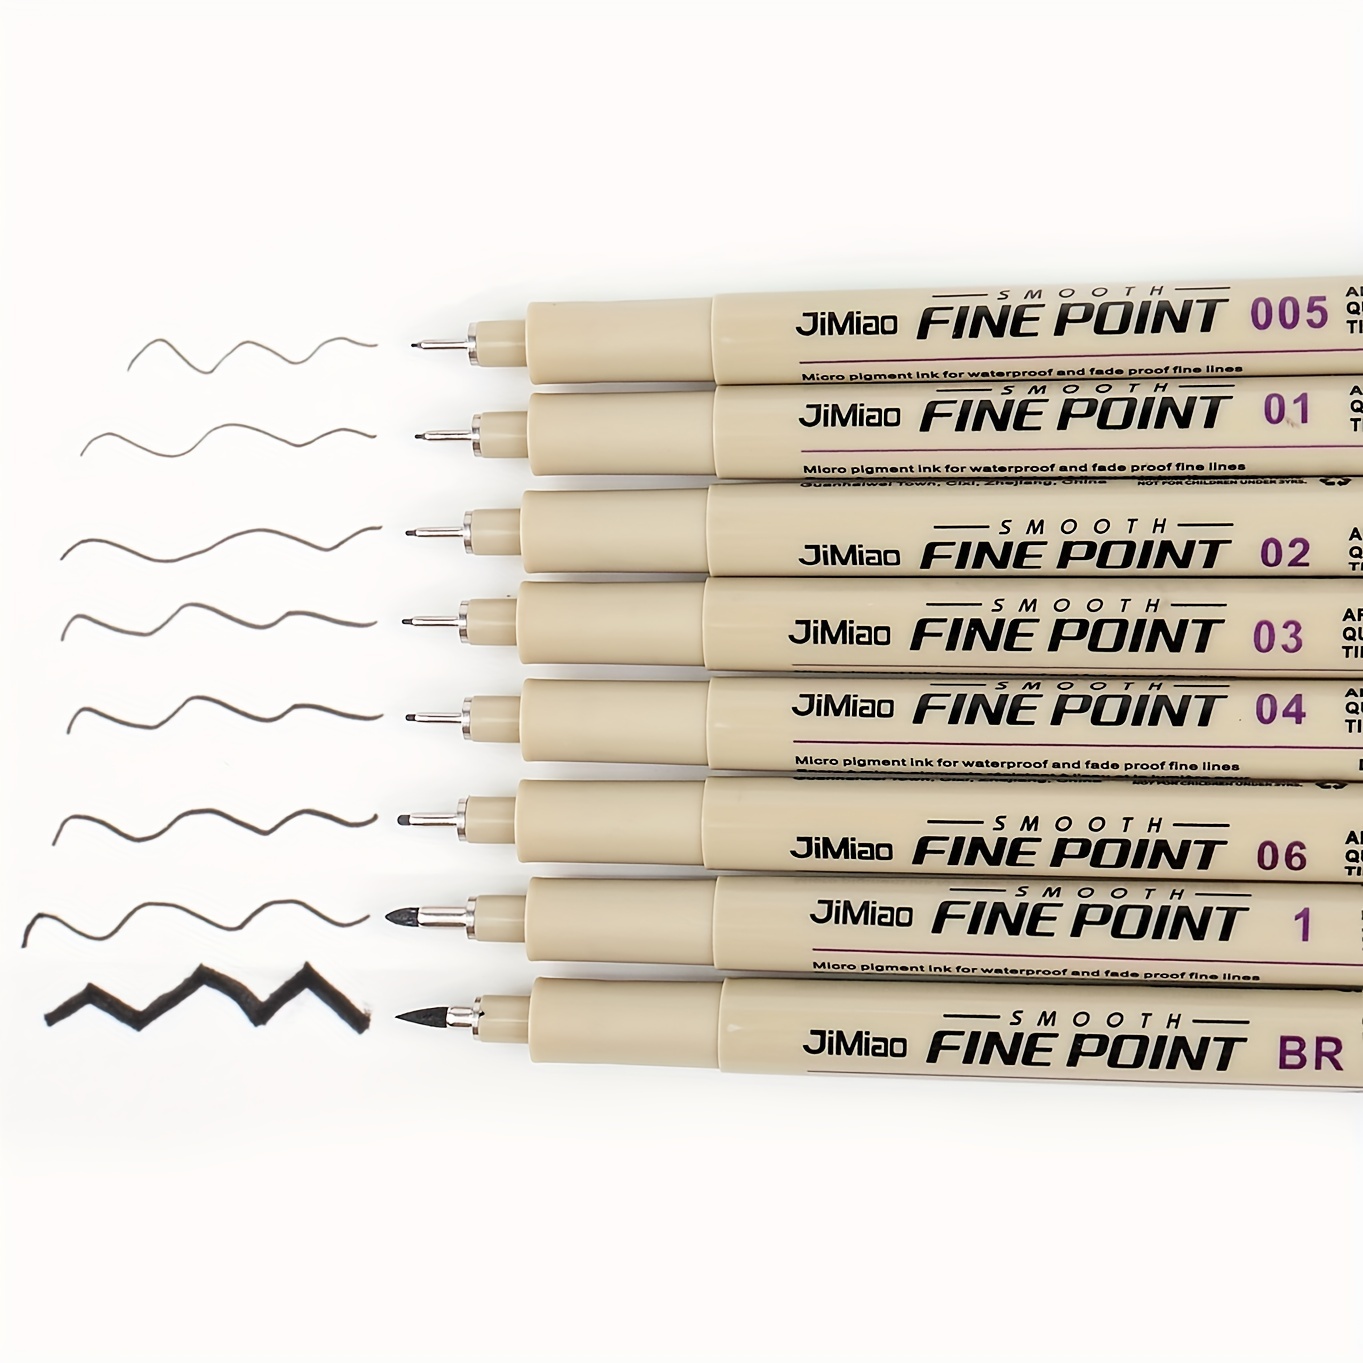 SAKURA Pigma Micron Fineliner Pens - Archival Black Ink Pens - Pens for  Writing, Drawing, or Journaling - Assorted Point Sizes - 6 Pack